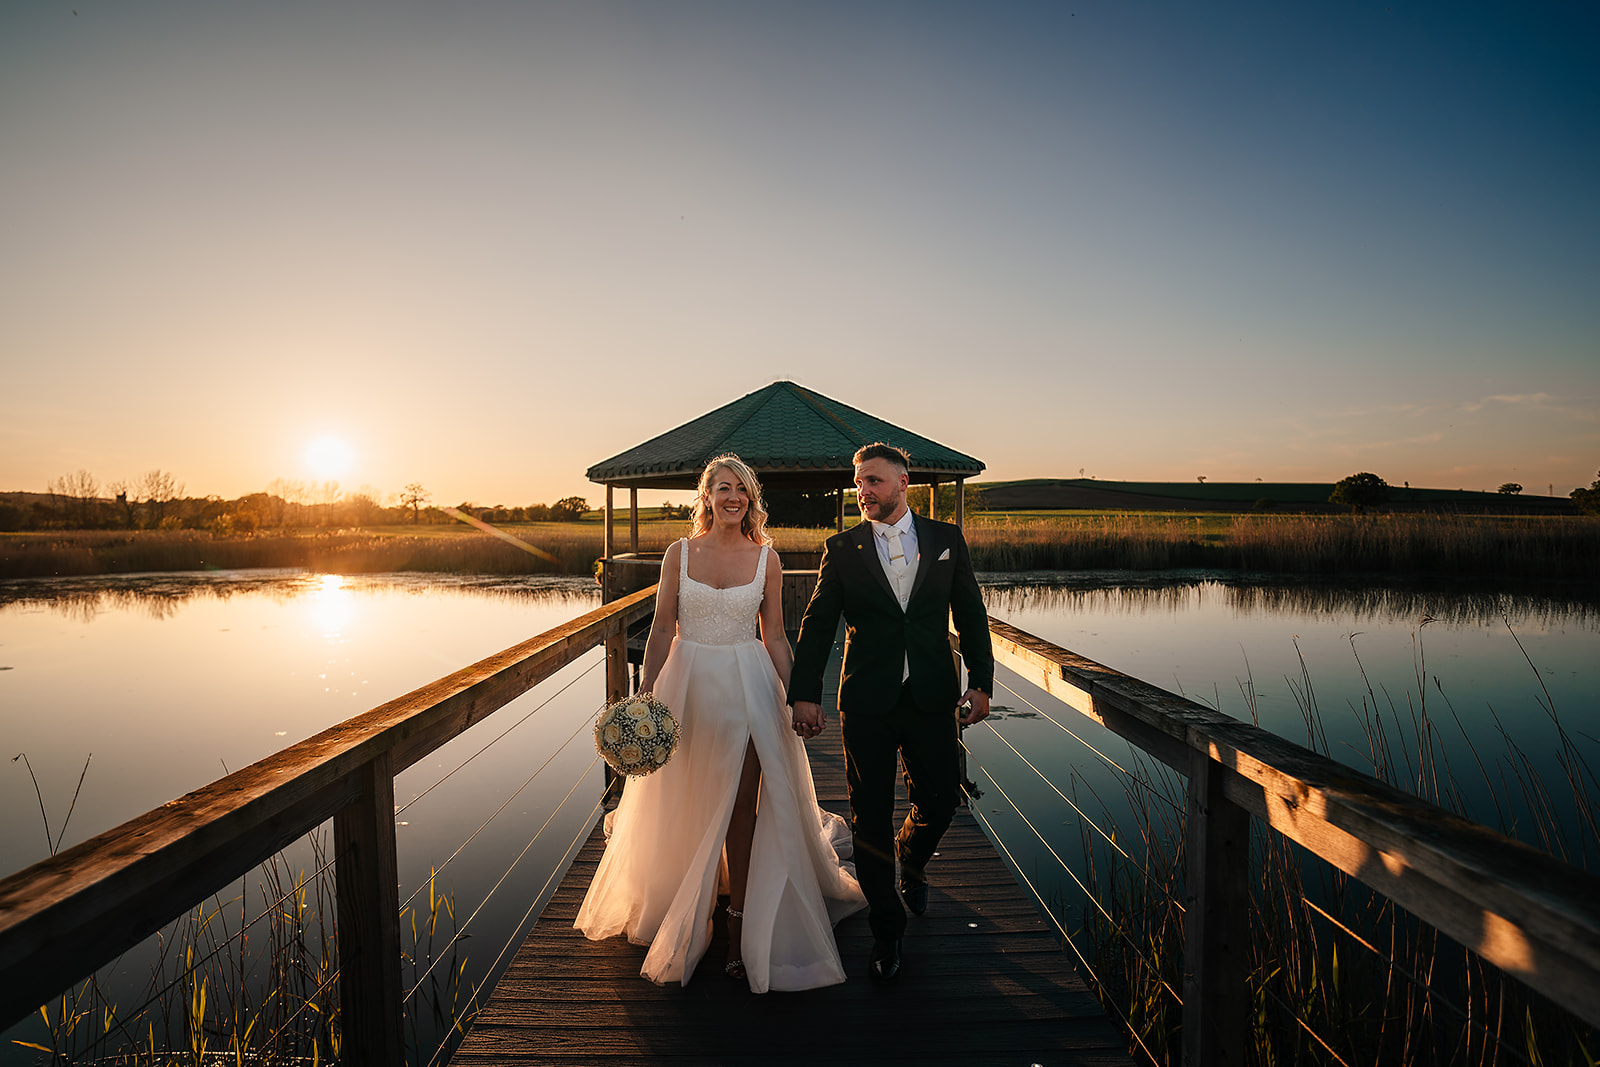 A bride and groom hold hands walking down a wooden pier at sunset, with a gazebo and still water in the background. The bride holds a bouquet and both are smiling.